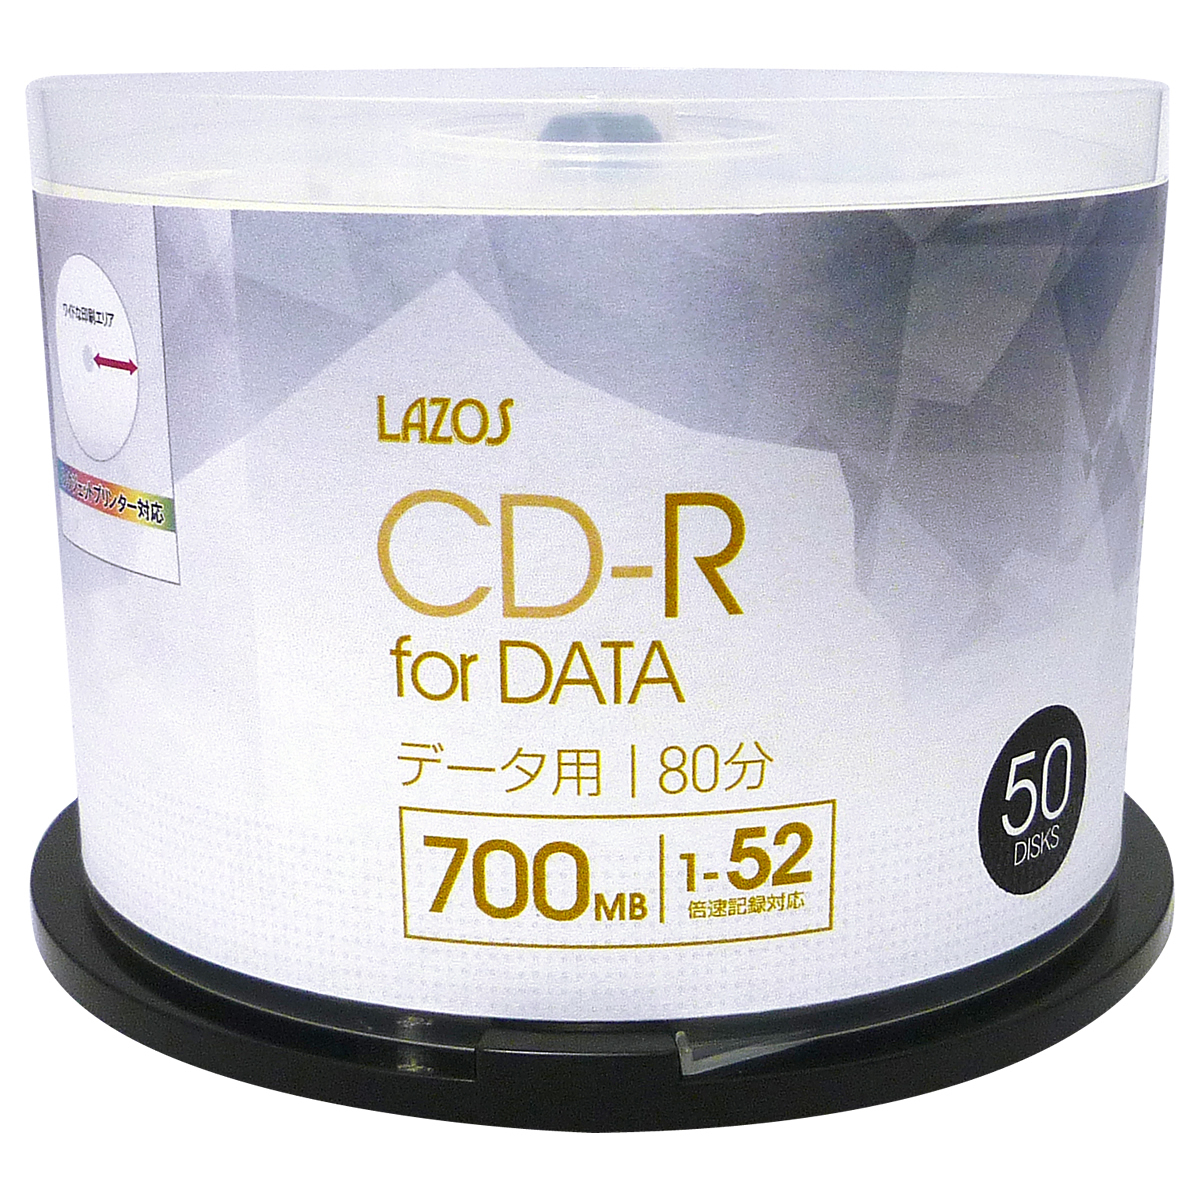  including in a package possibility CD-R 50 sheets set spindle case go in 700MB for DATA 1-52 speed correspondence white wide printing correspondence L-CD50P/2587 Lazosx2 piece set /.